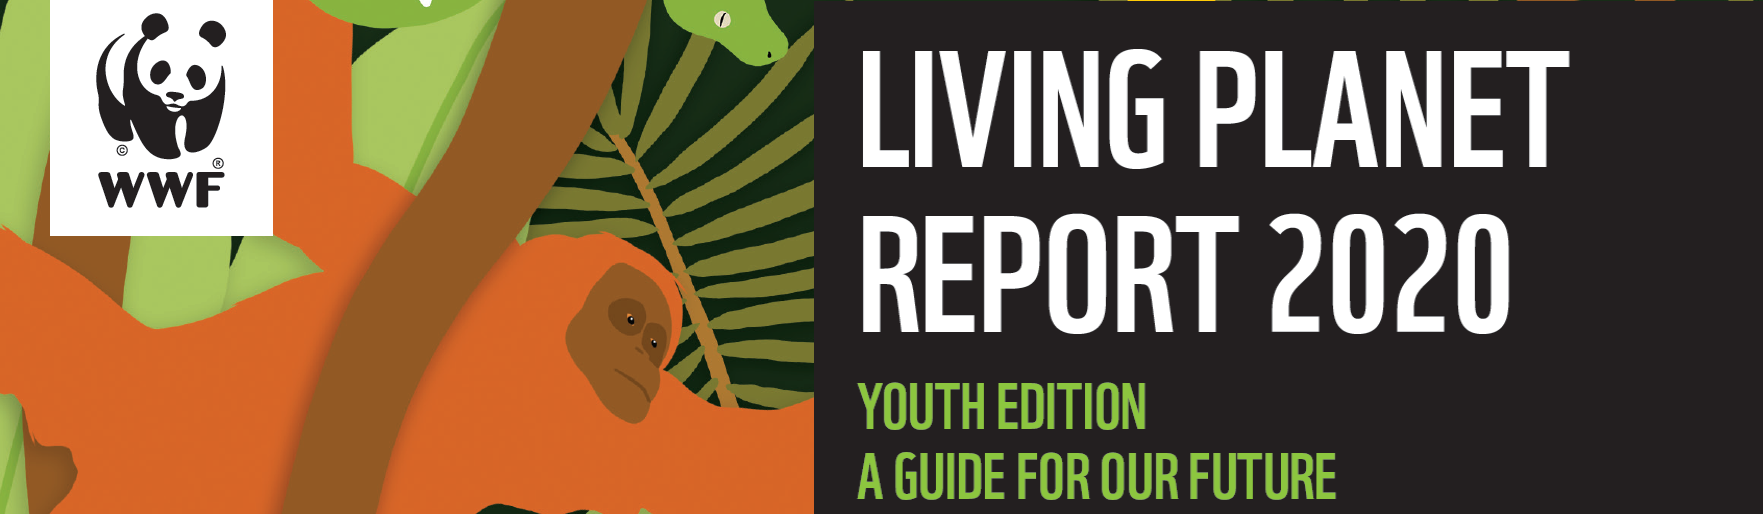 Living Planet Report 2020: Youth Edition Pack